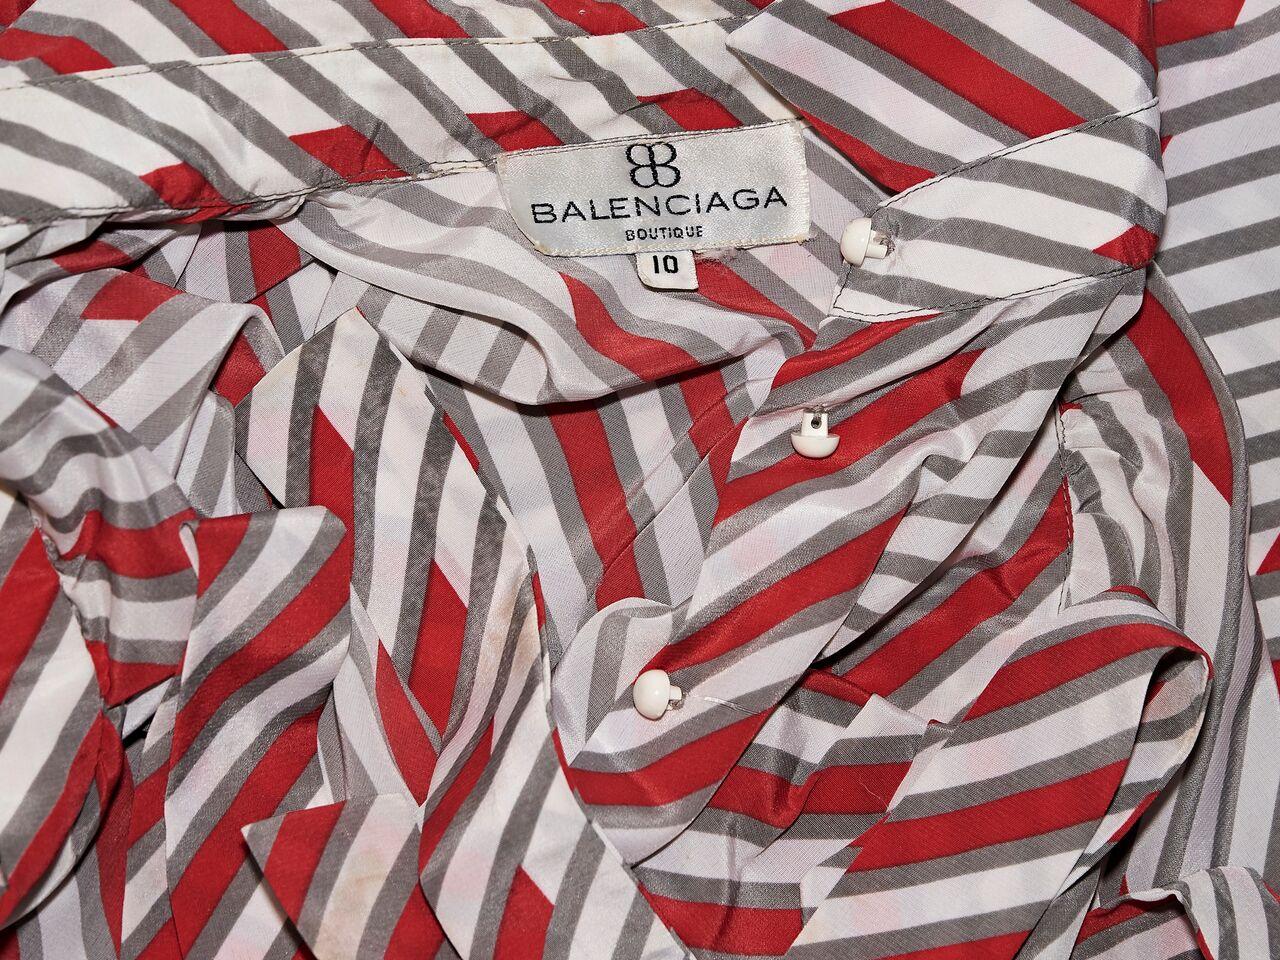 Product details:  Vintage red and white striped blouse by Balenciaga.  Spread collar.  Short sleeves.  Button-front closure.  Matching self-tie belted waist.  34